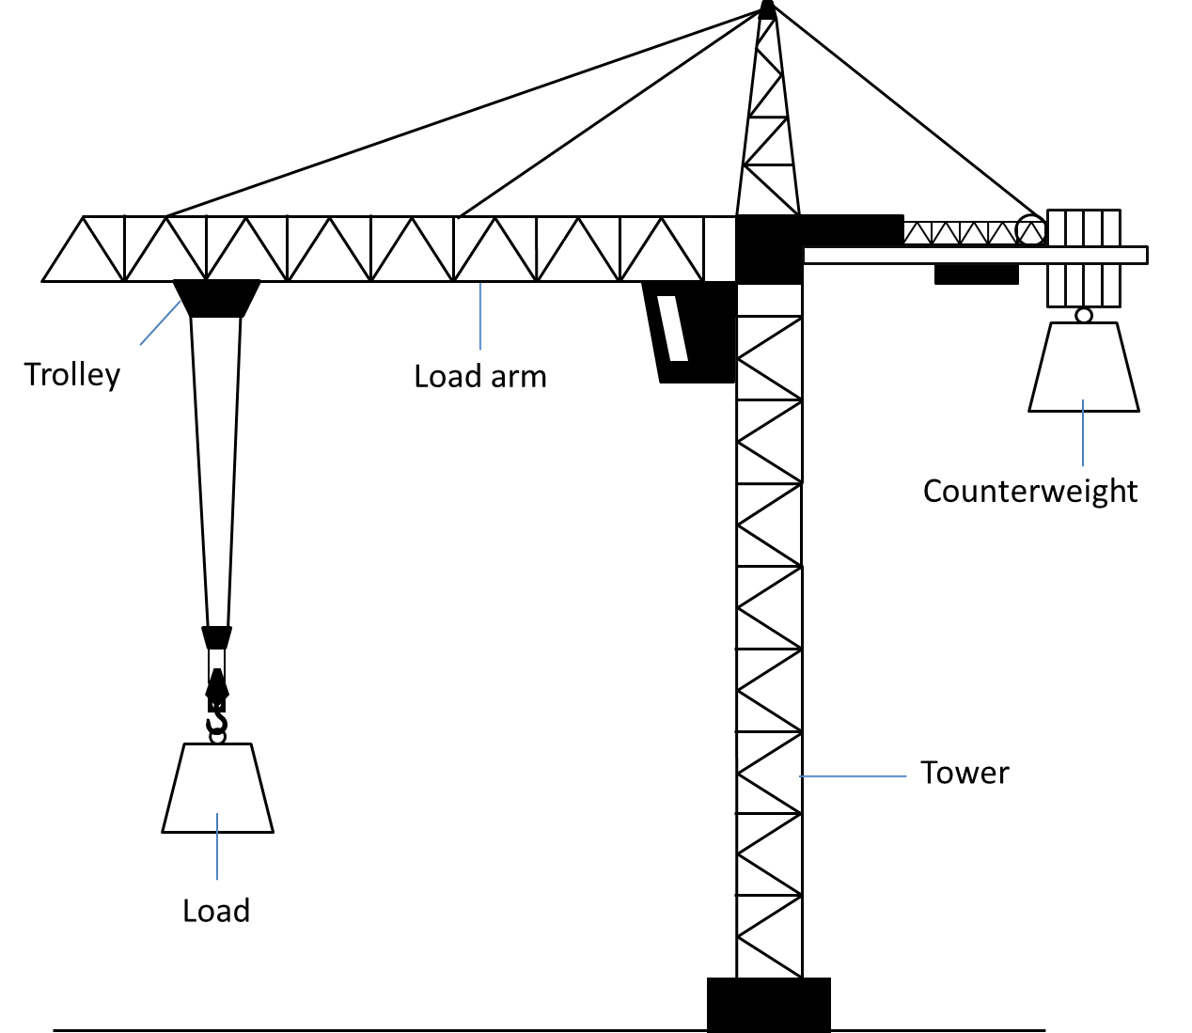 Image of a tower crane with labels showing the locations of the trolley, load, load arm, tower and counterweight.